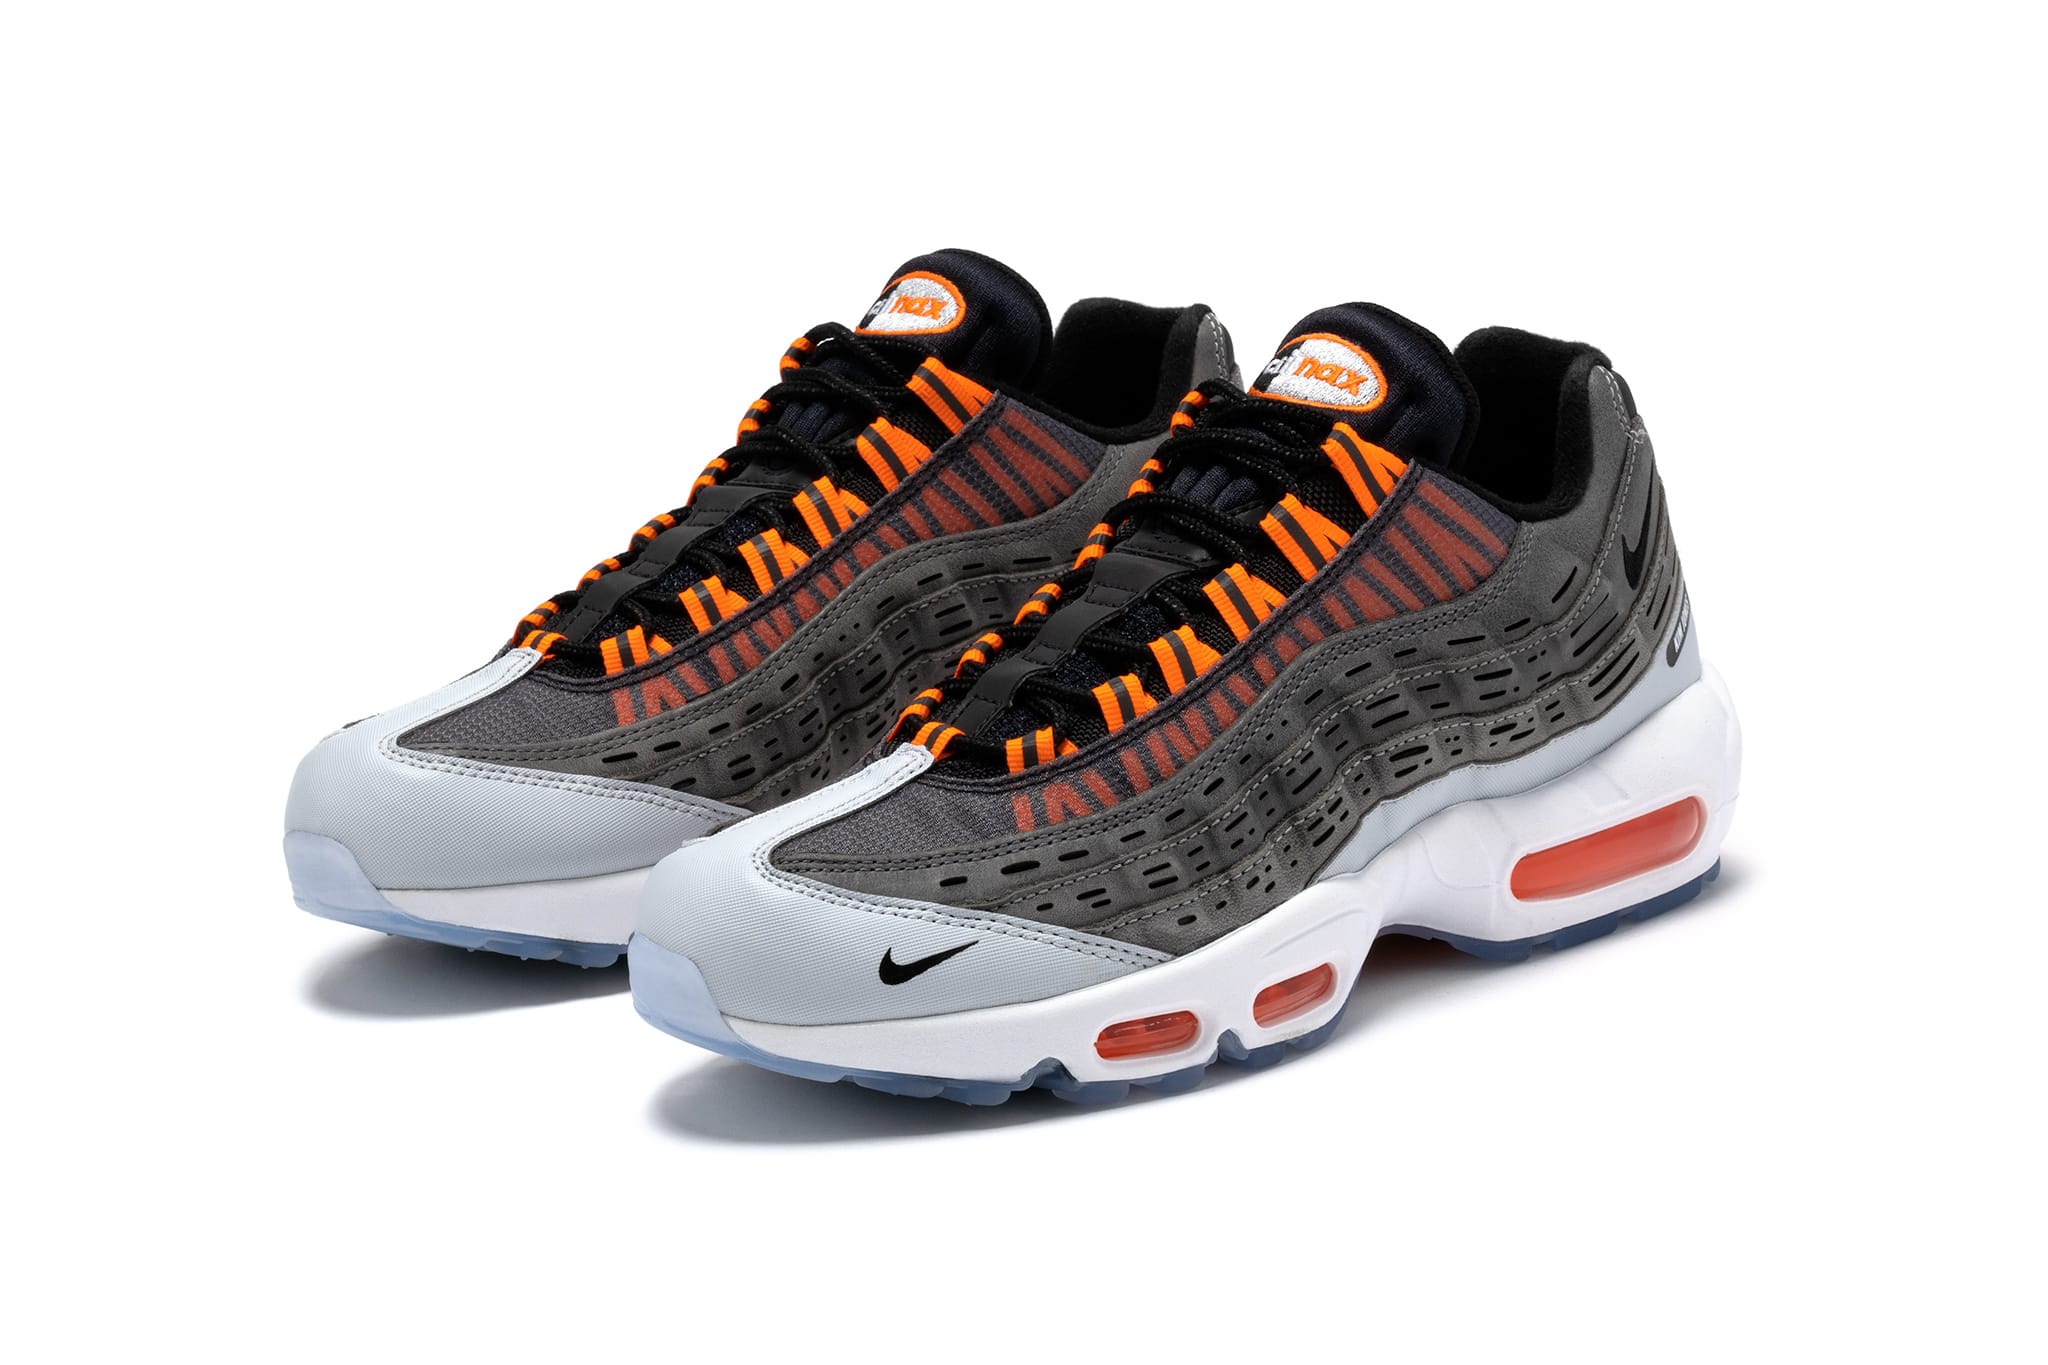 Nike x Kim Jones Air Max 95 | Now Available | HAVEN